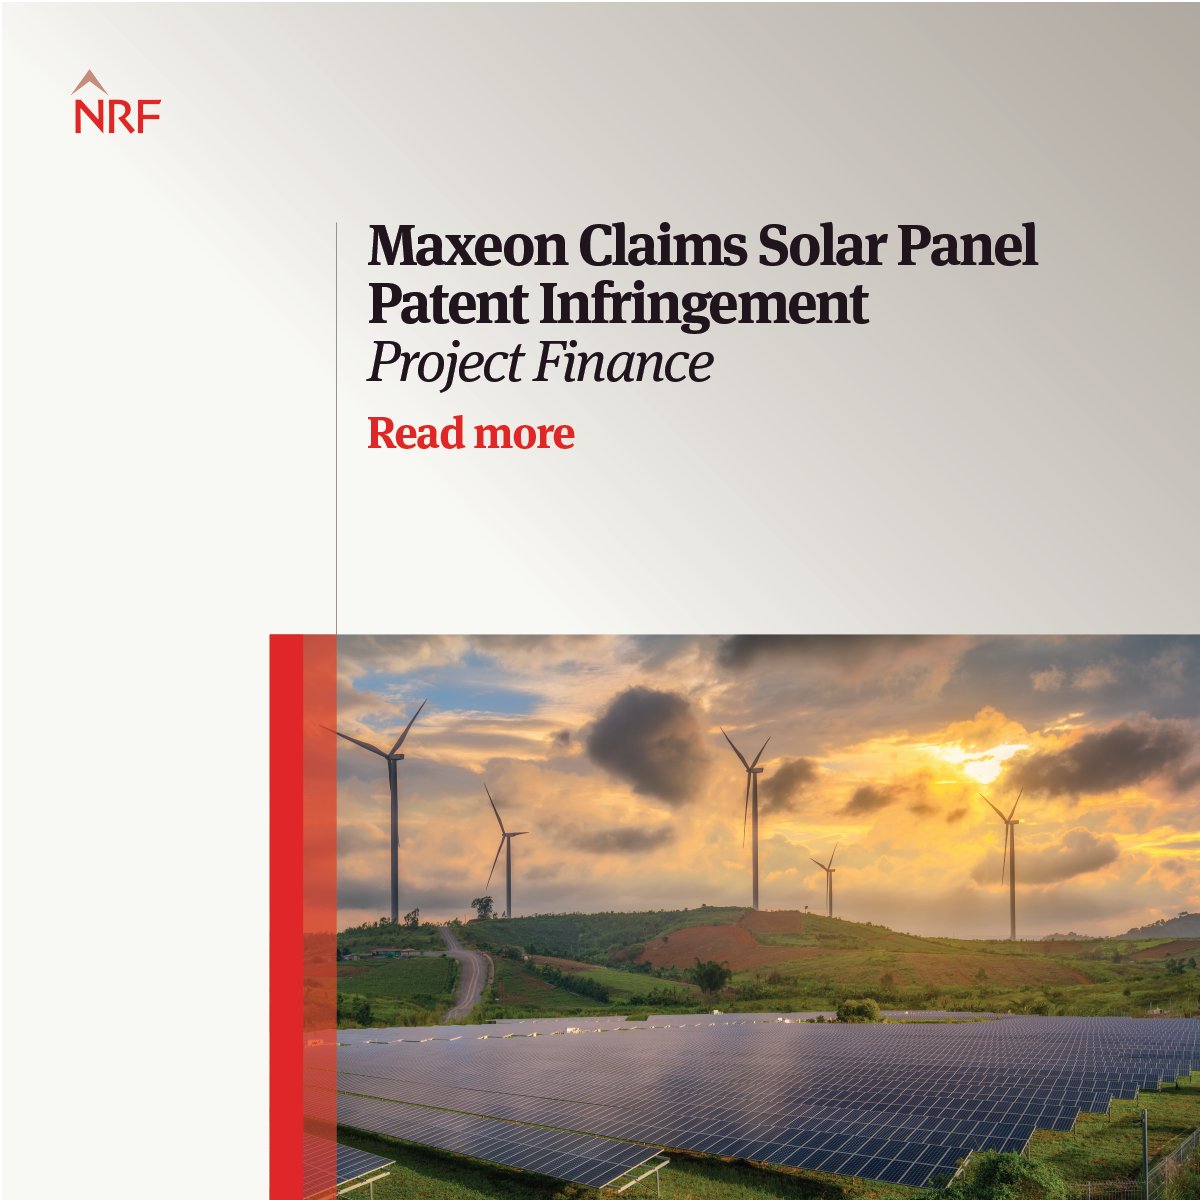 Maxeon has sued three solar panel manufacturers alleging patent infringement. We discuss the potential effects on solar projects. ow.ly/j1So50RleSM